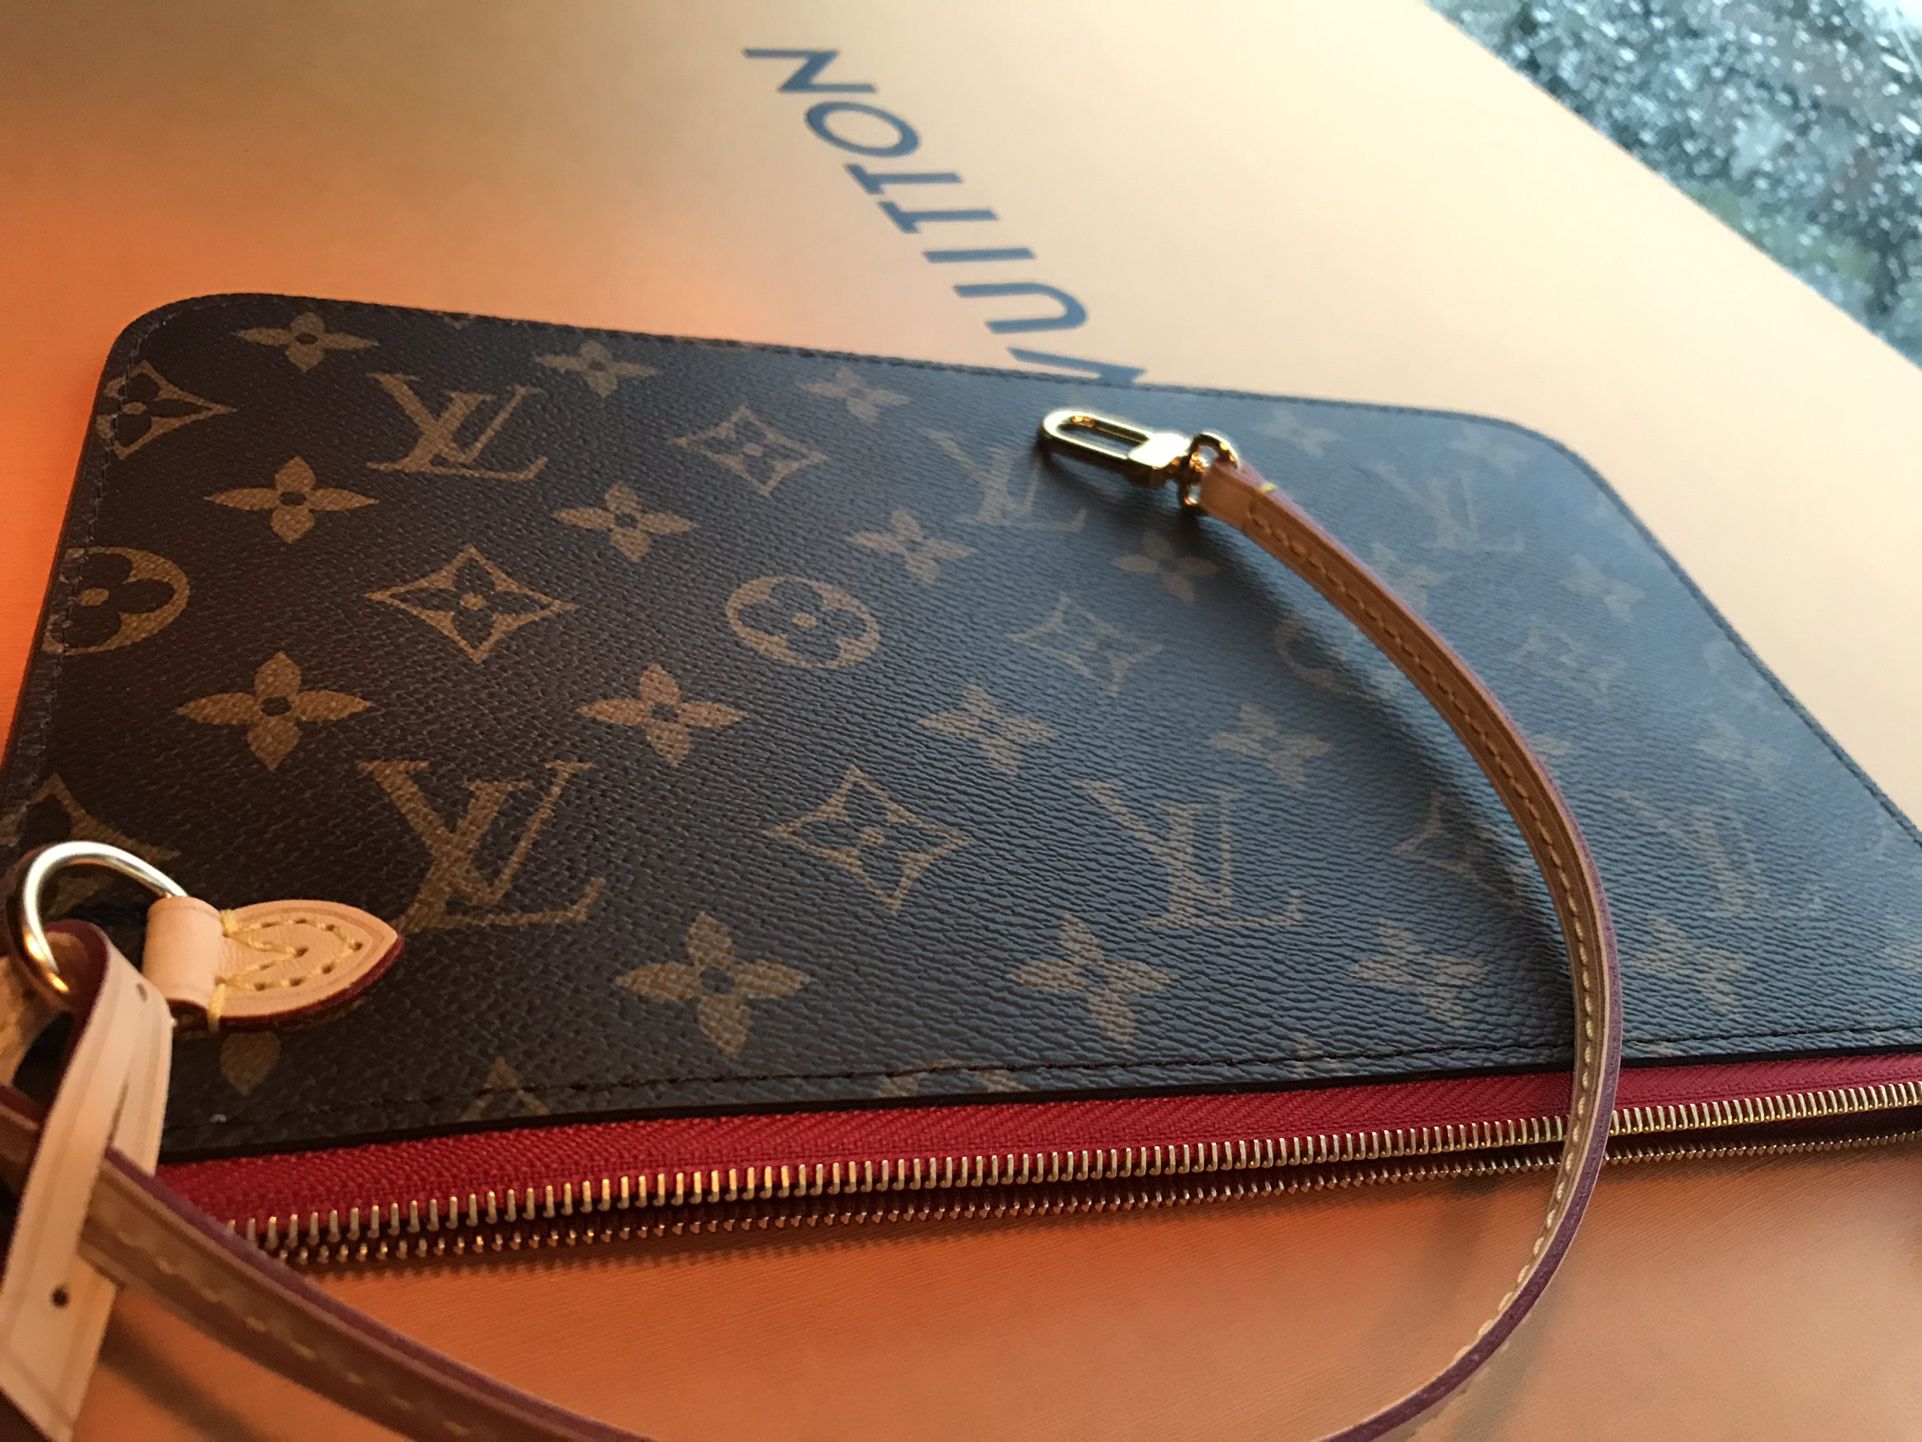 LOUIS VUITTON On My Side PM for Sale in Milpitas, CA - OfferUp